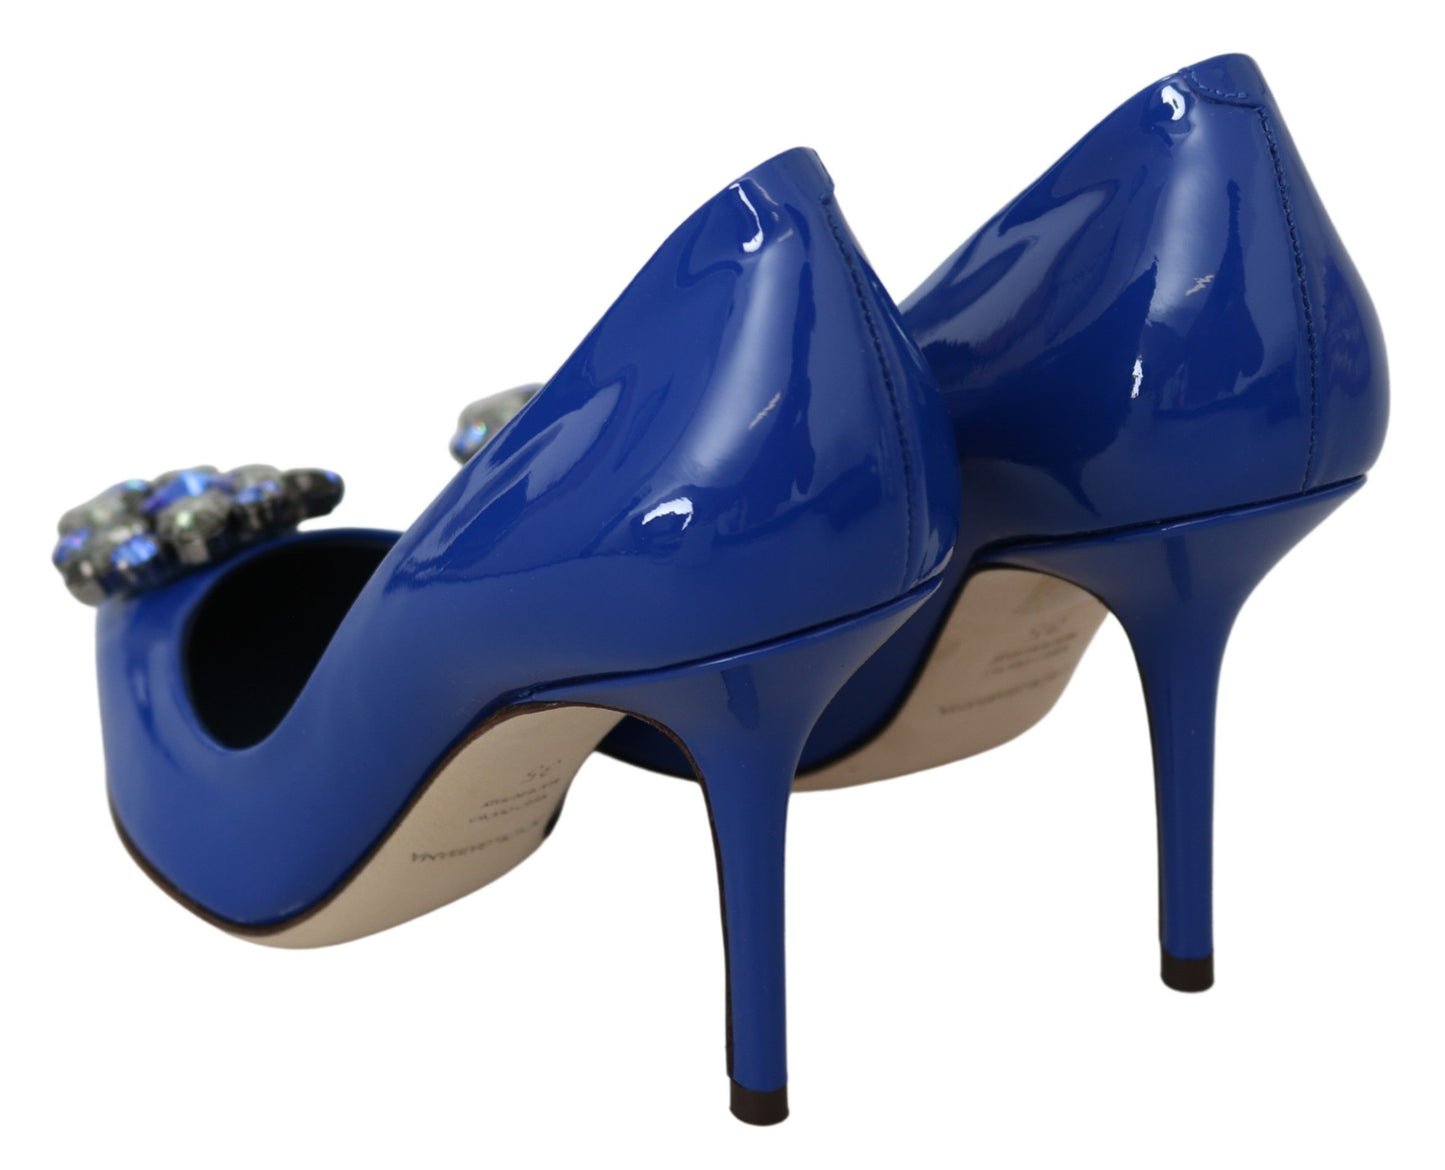 Electric Blue Patent Leather Pumps with Crystals